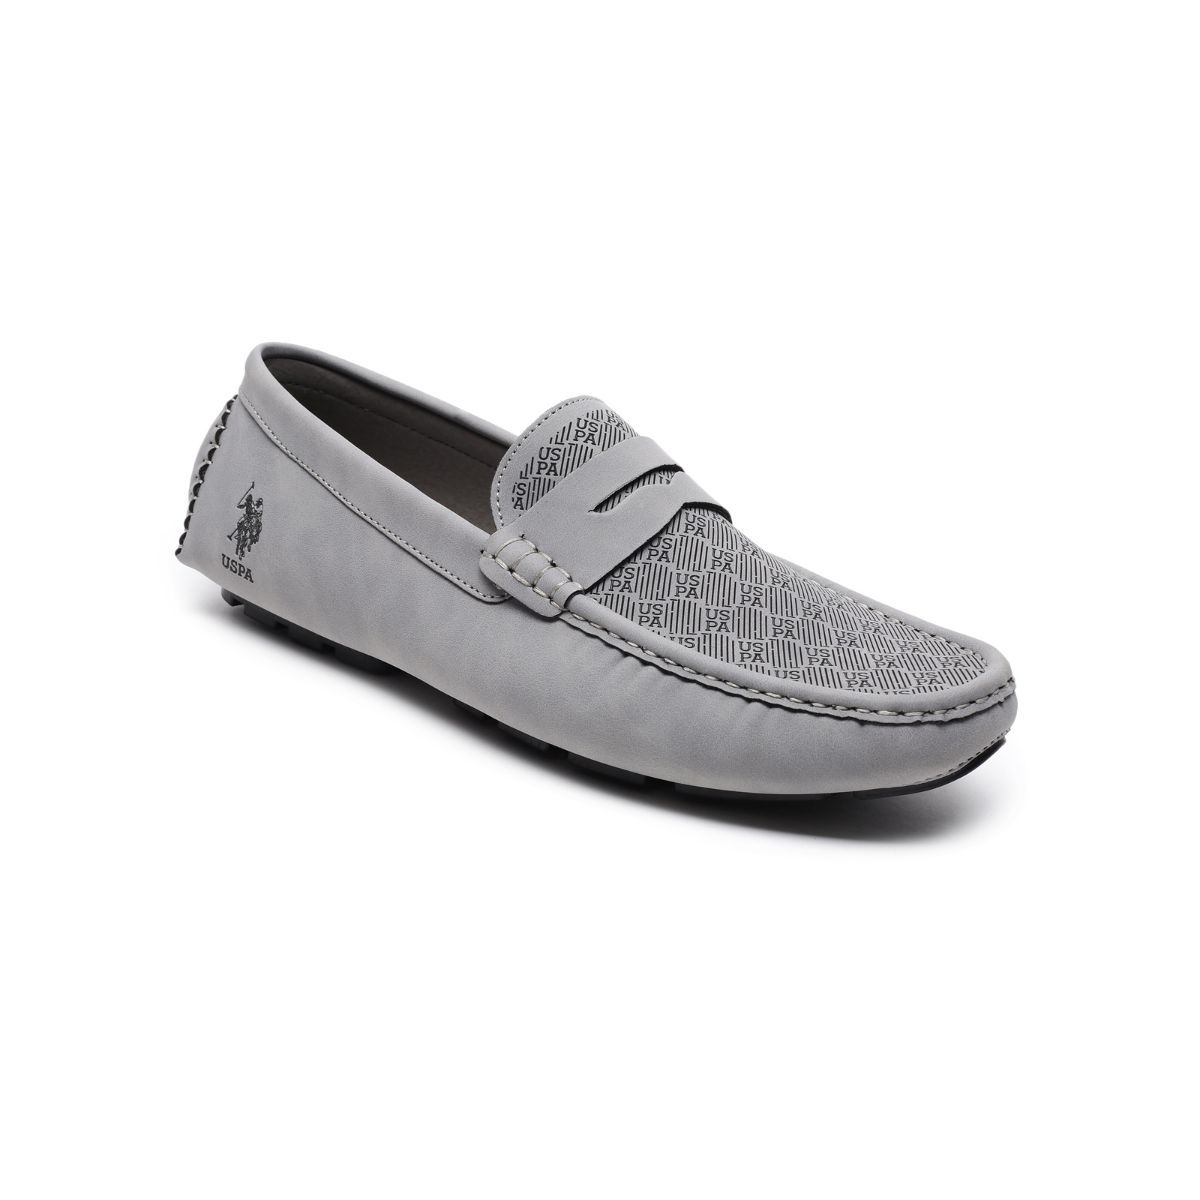 . POLO ASSN. Asvalt Grey Loafers: Buy . POLO ASSN. Asvalt Grey Loafers  Online at Best Price in India | Nykaa